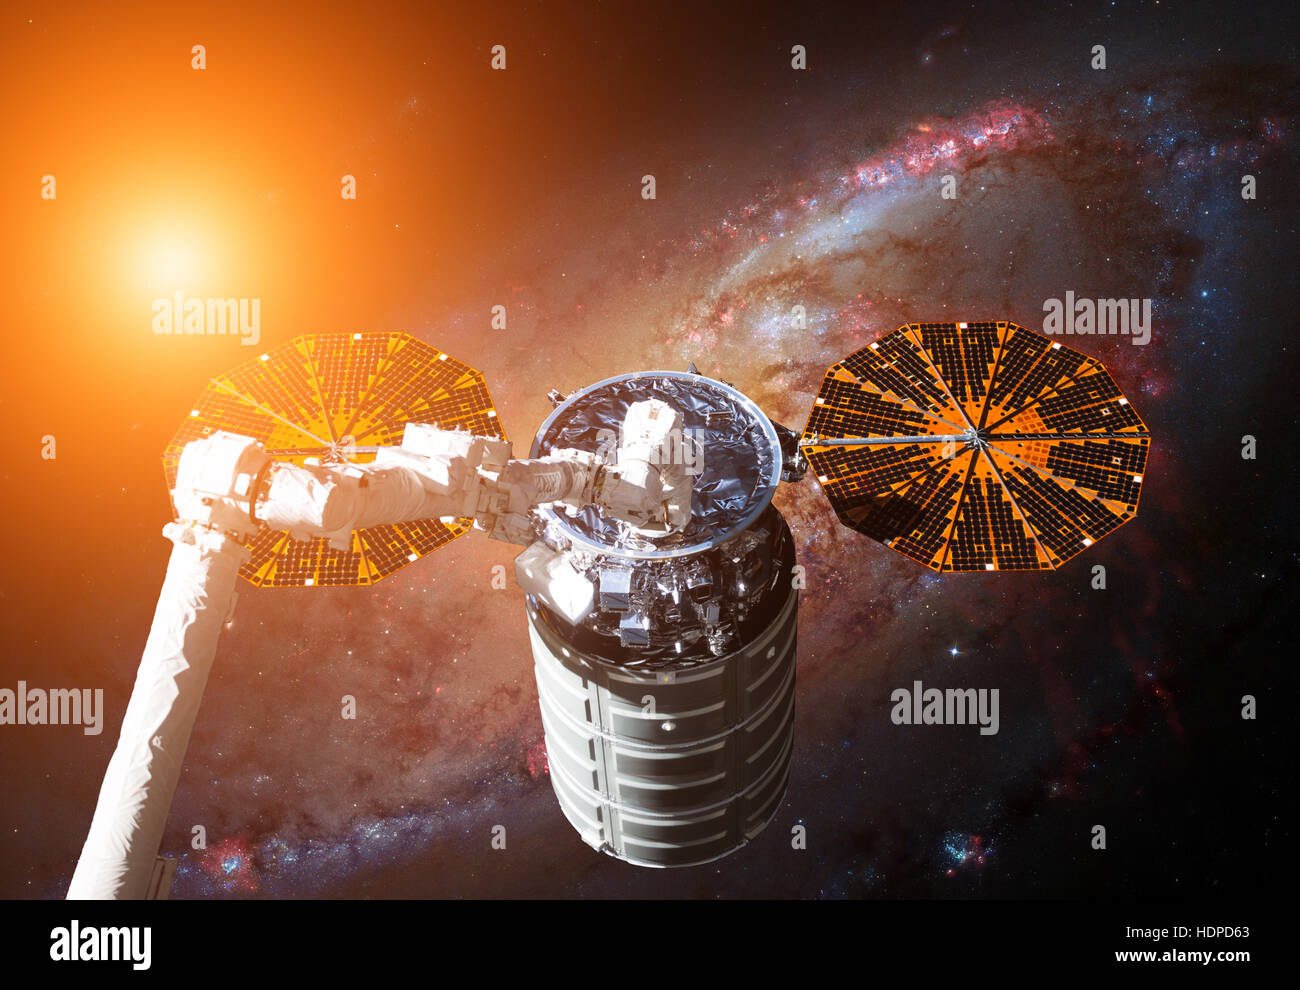 The Cygnus spacecraft in open space. Stock Photo